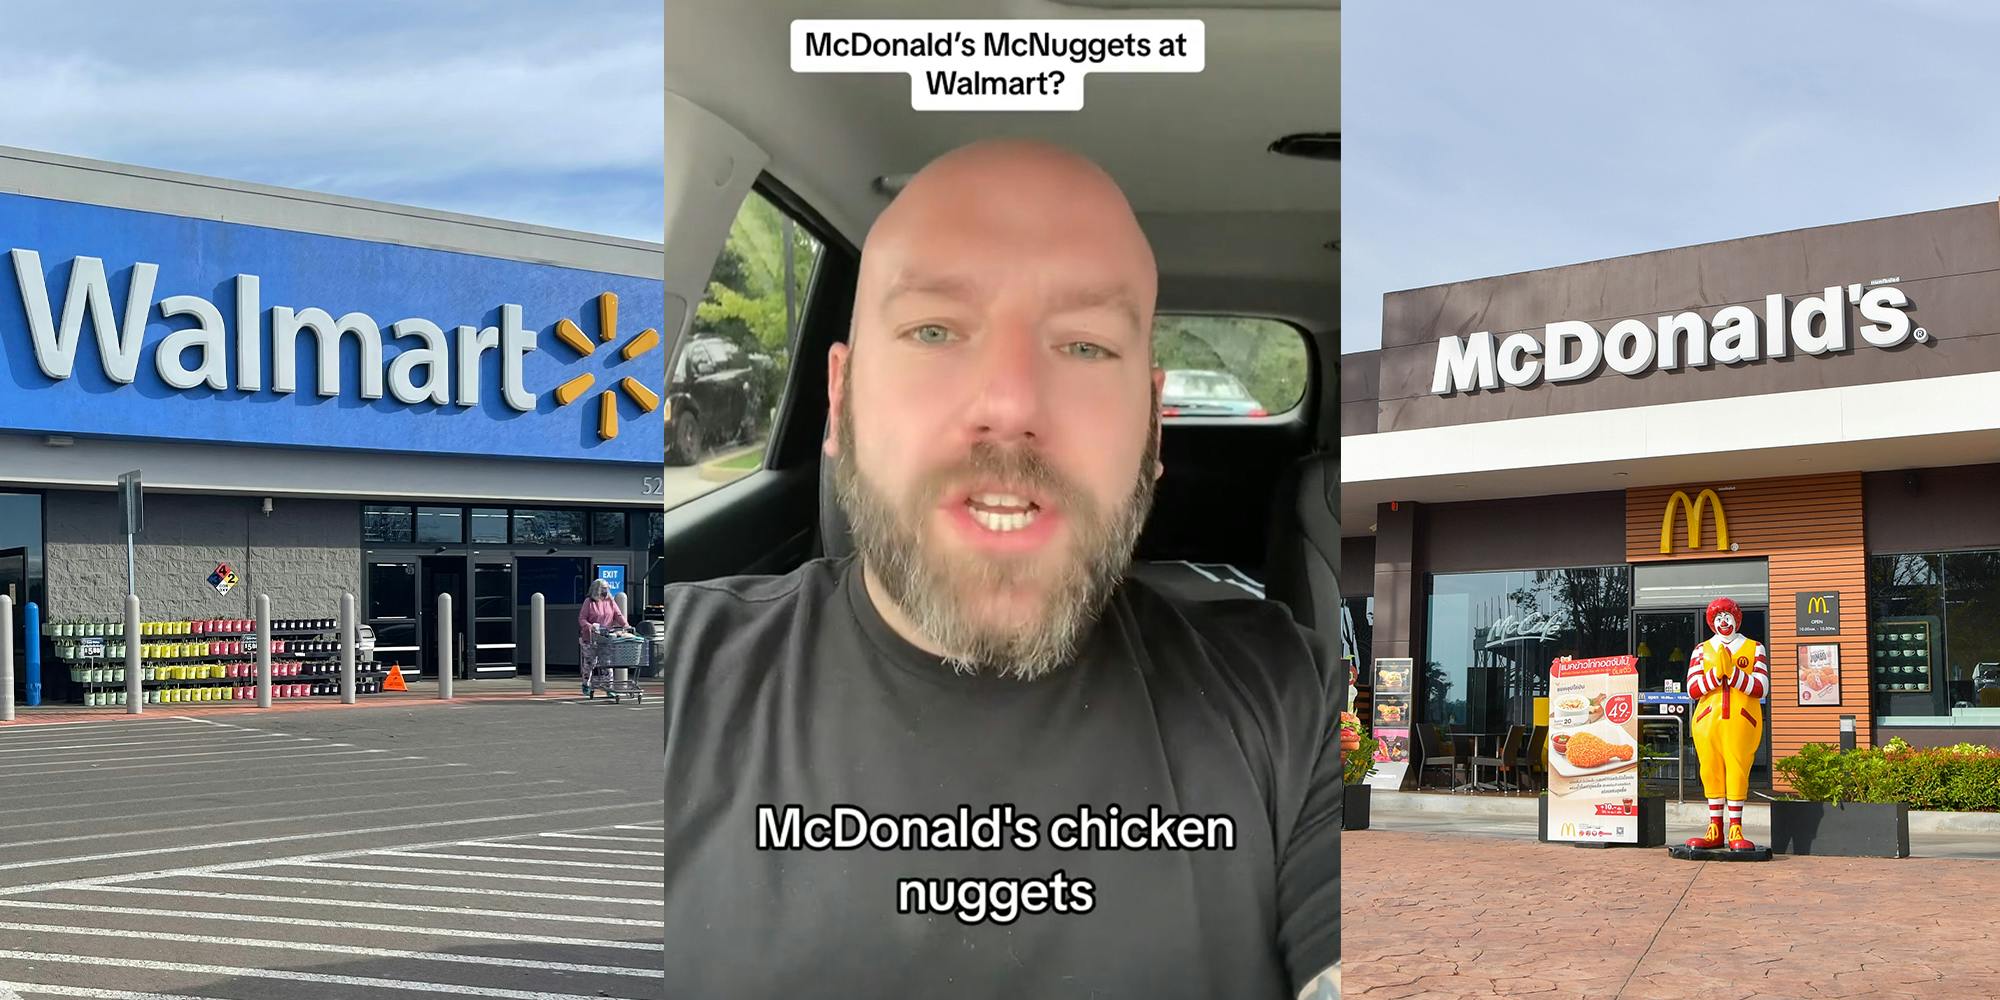 McDonald's former corporate chef shares which store brand chicken nugget from Walmart is a McDonald's dupe